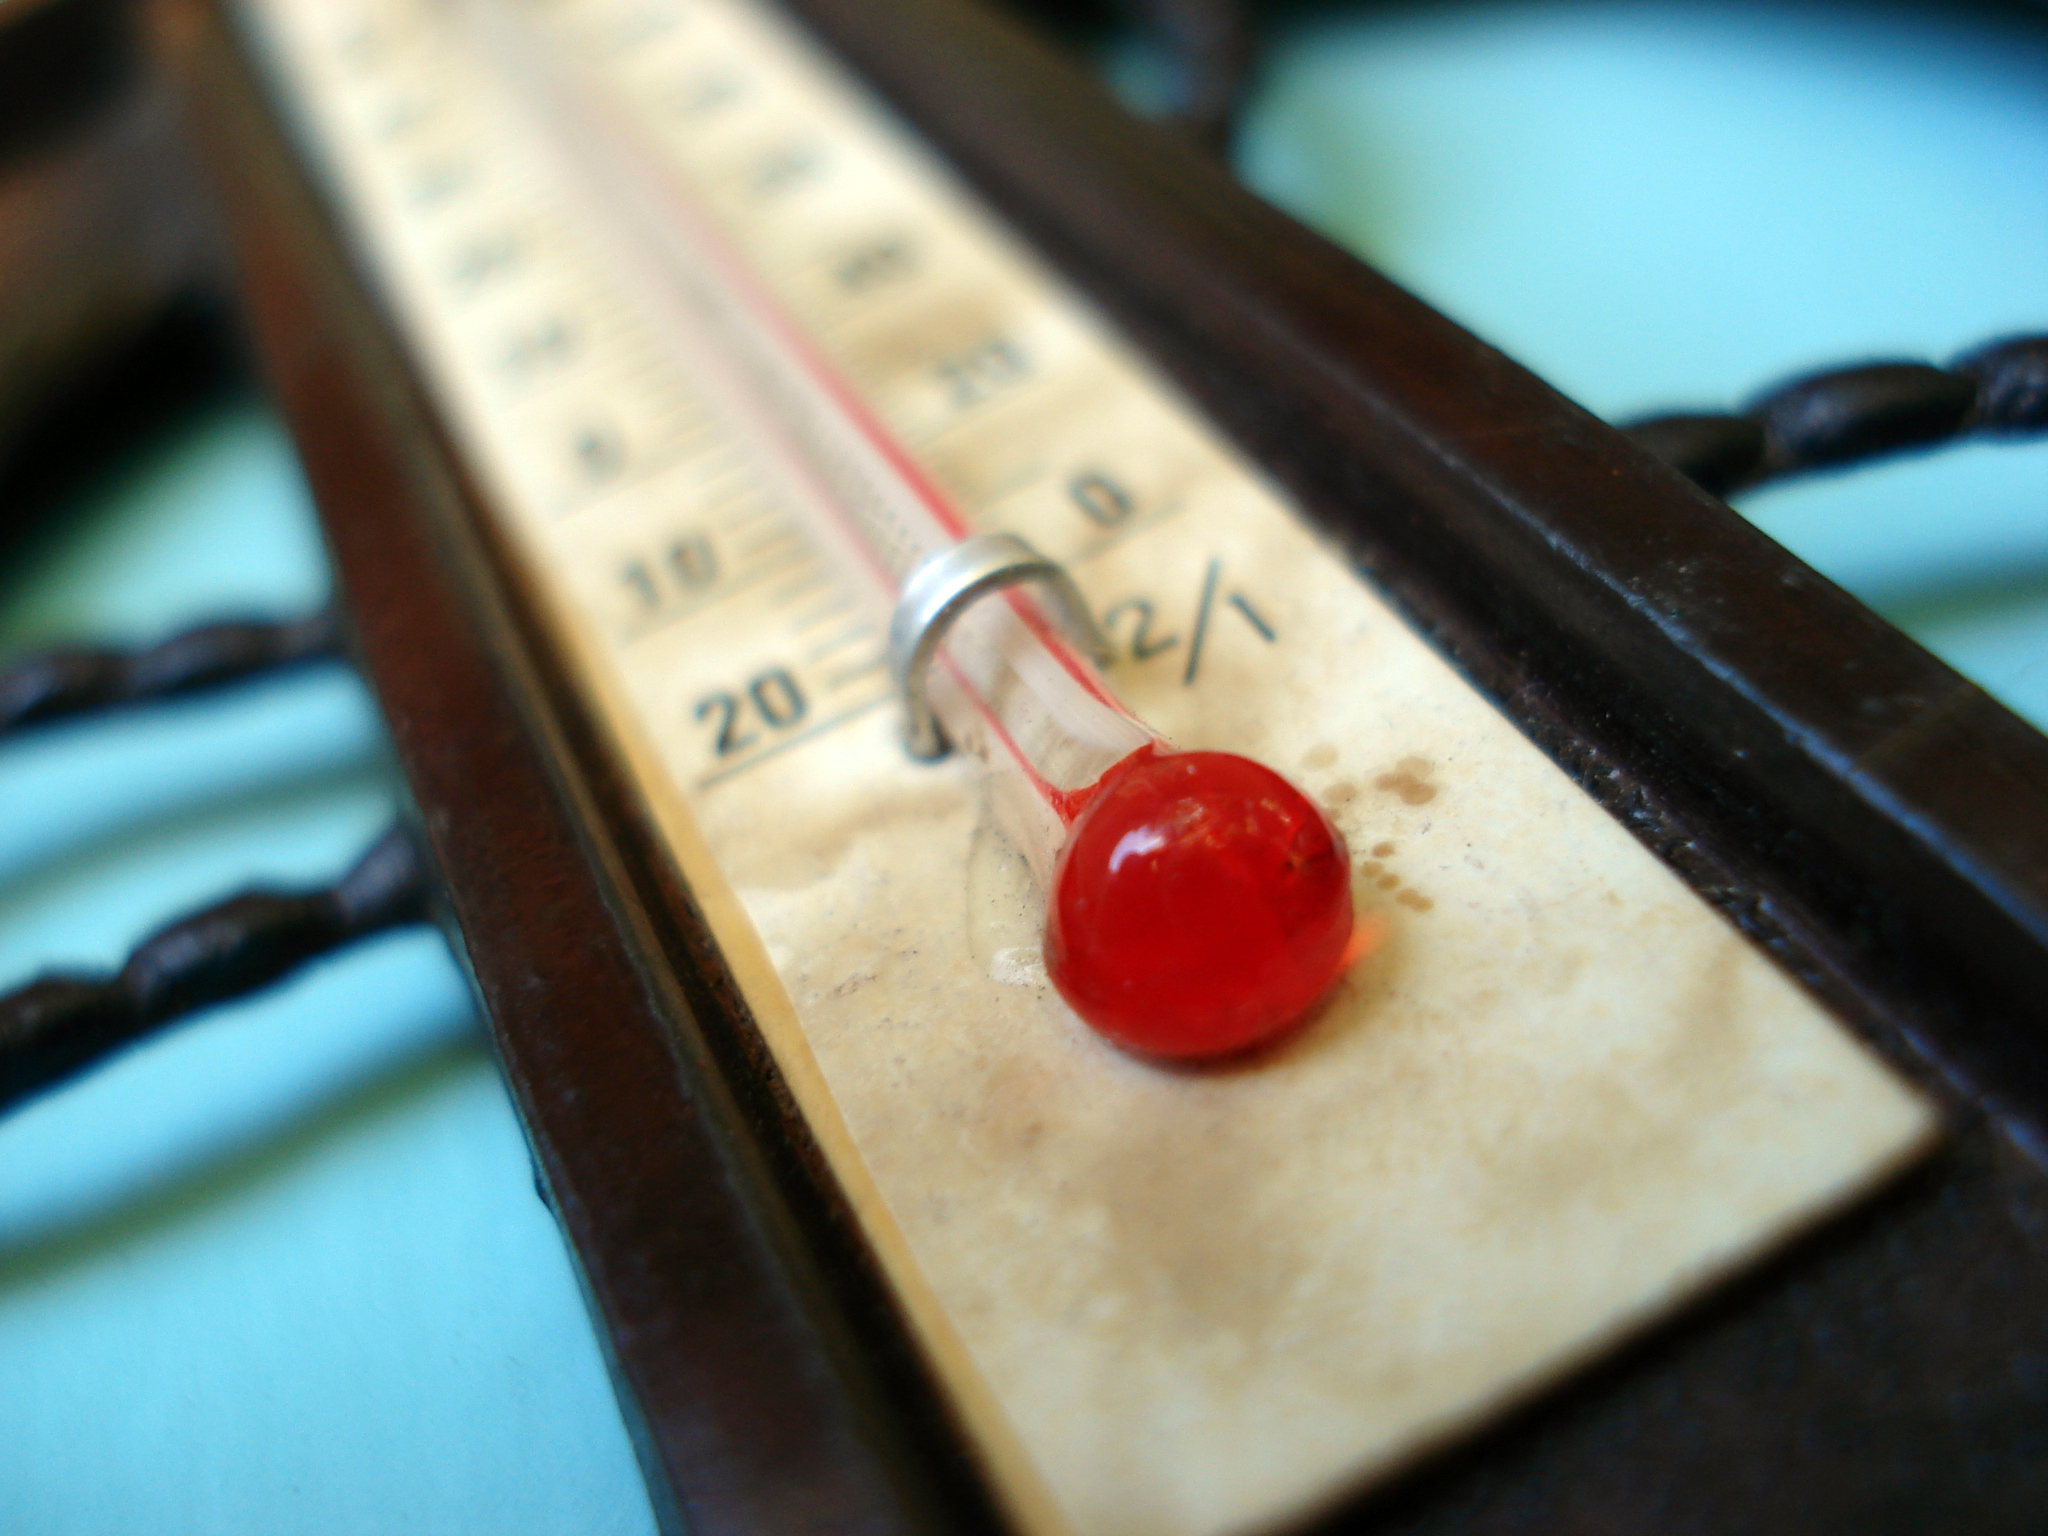 Thermometer Free Photo Download | FreeImages